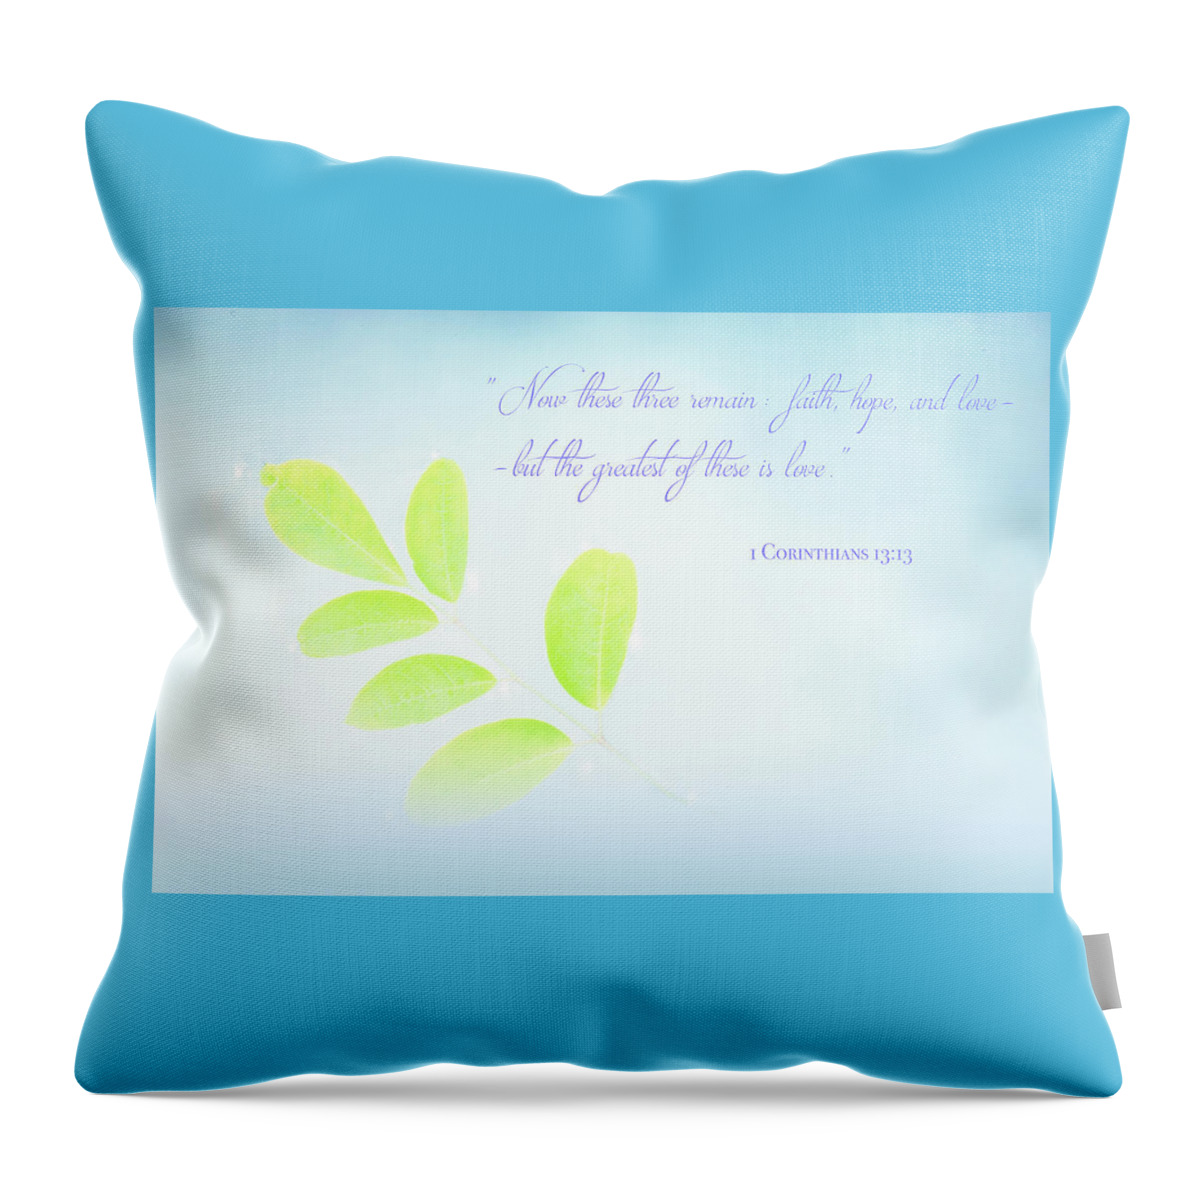 Love Throw Pillow featuring the photograph 1 Corinthians 13 13 by Mark Andrew Thomas